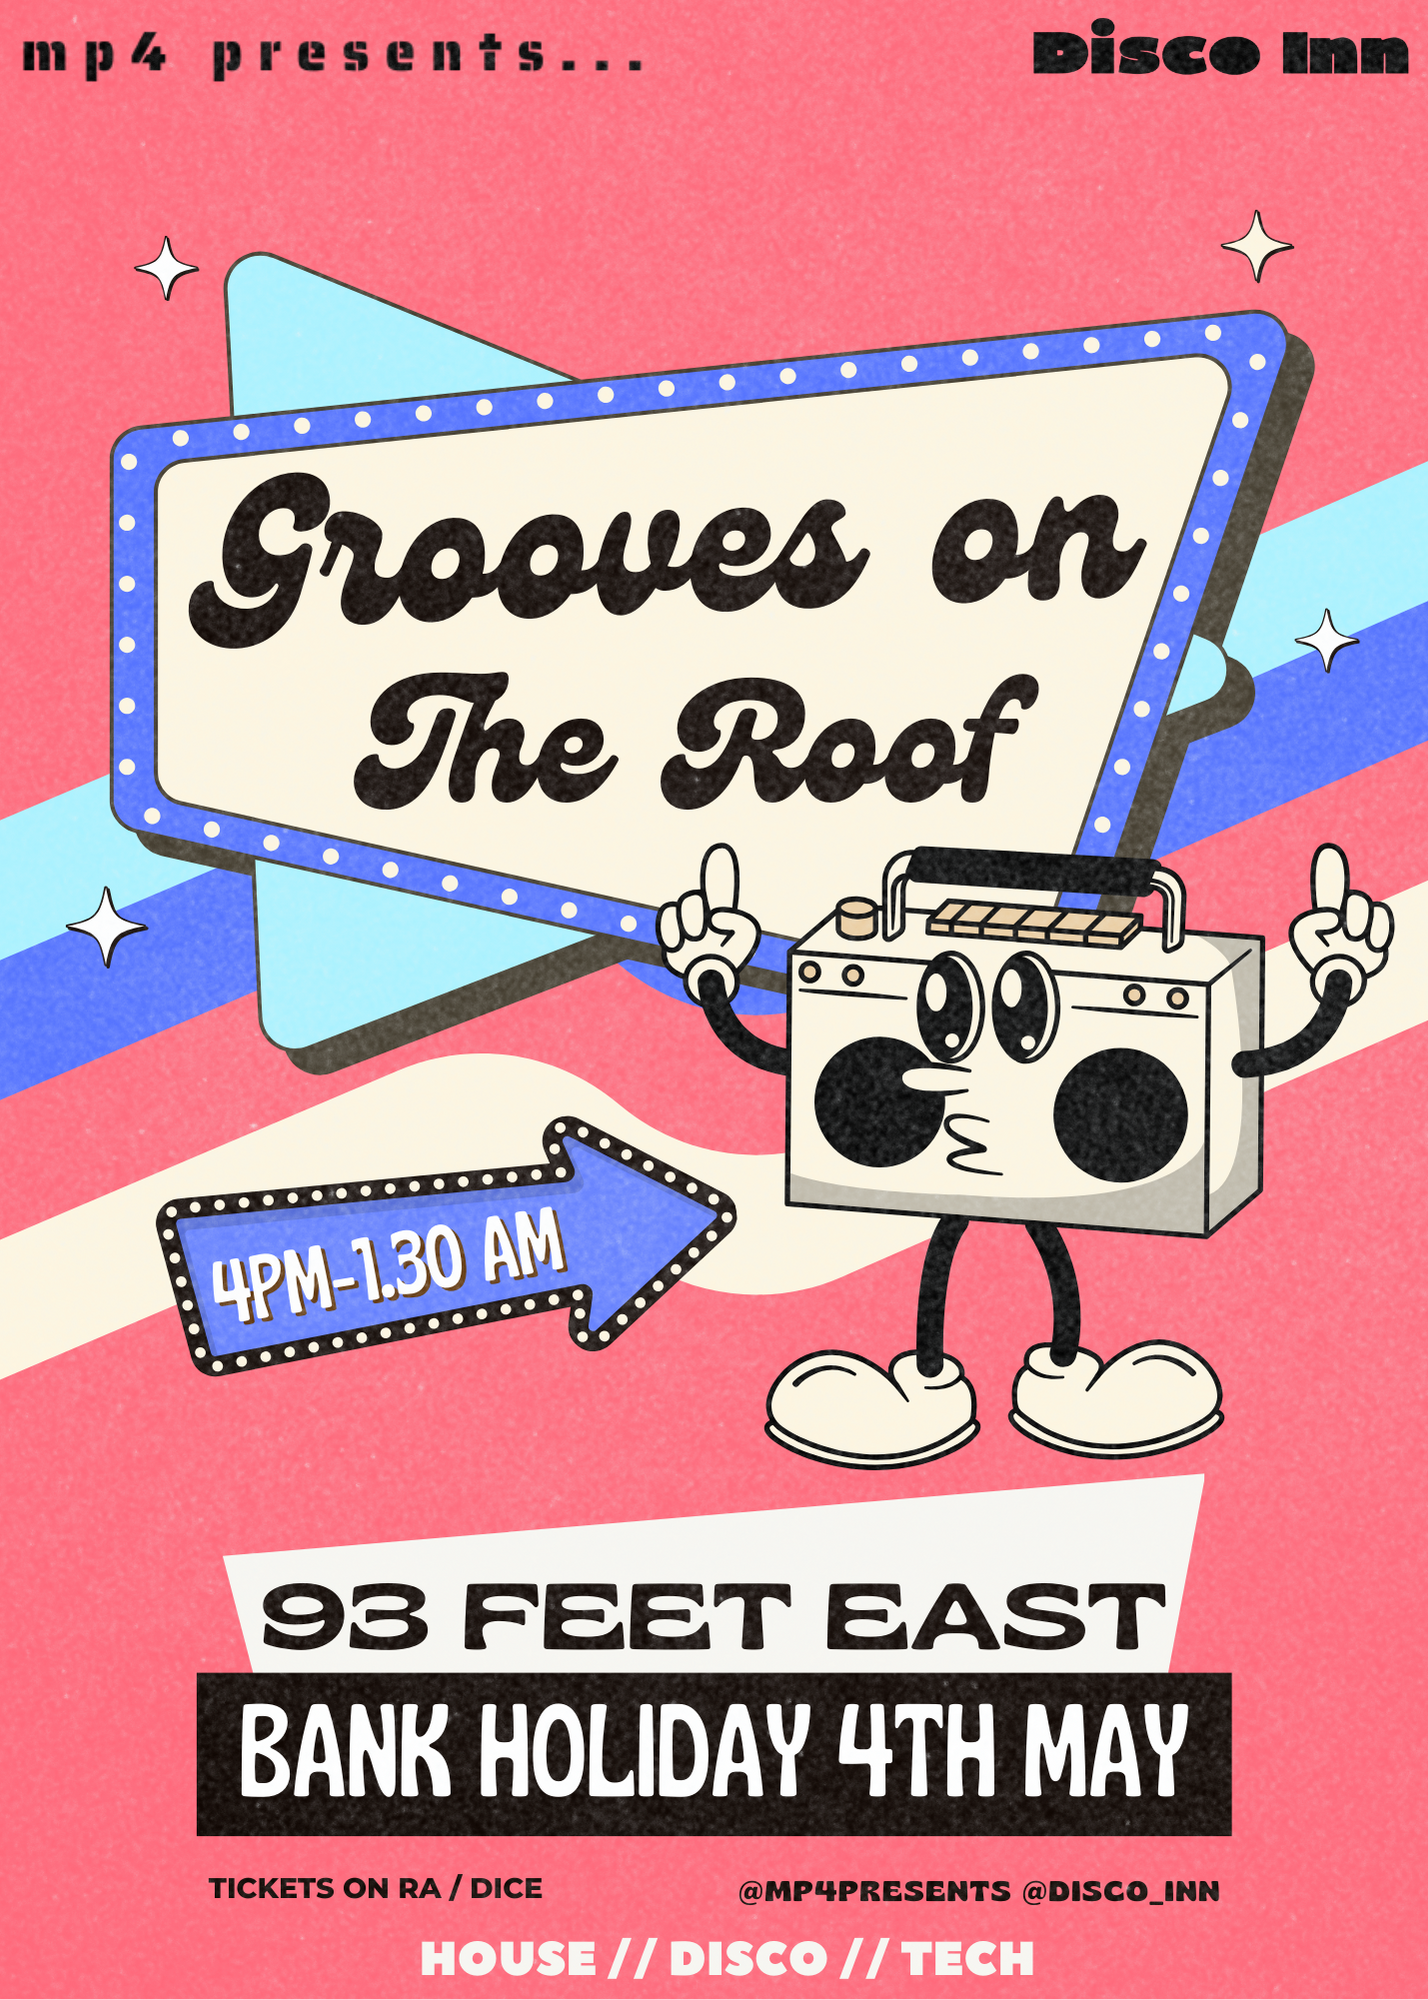 Grooves on the Roof - MP4presents... X Disco Inn - フライヤー表